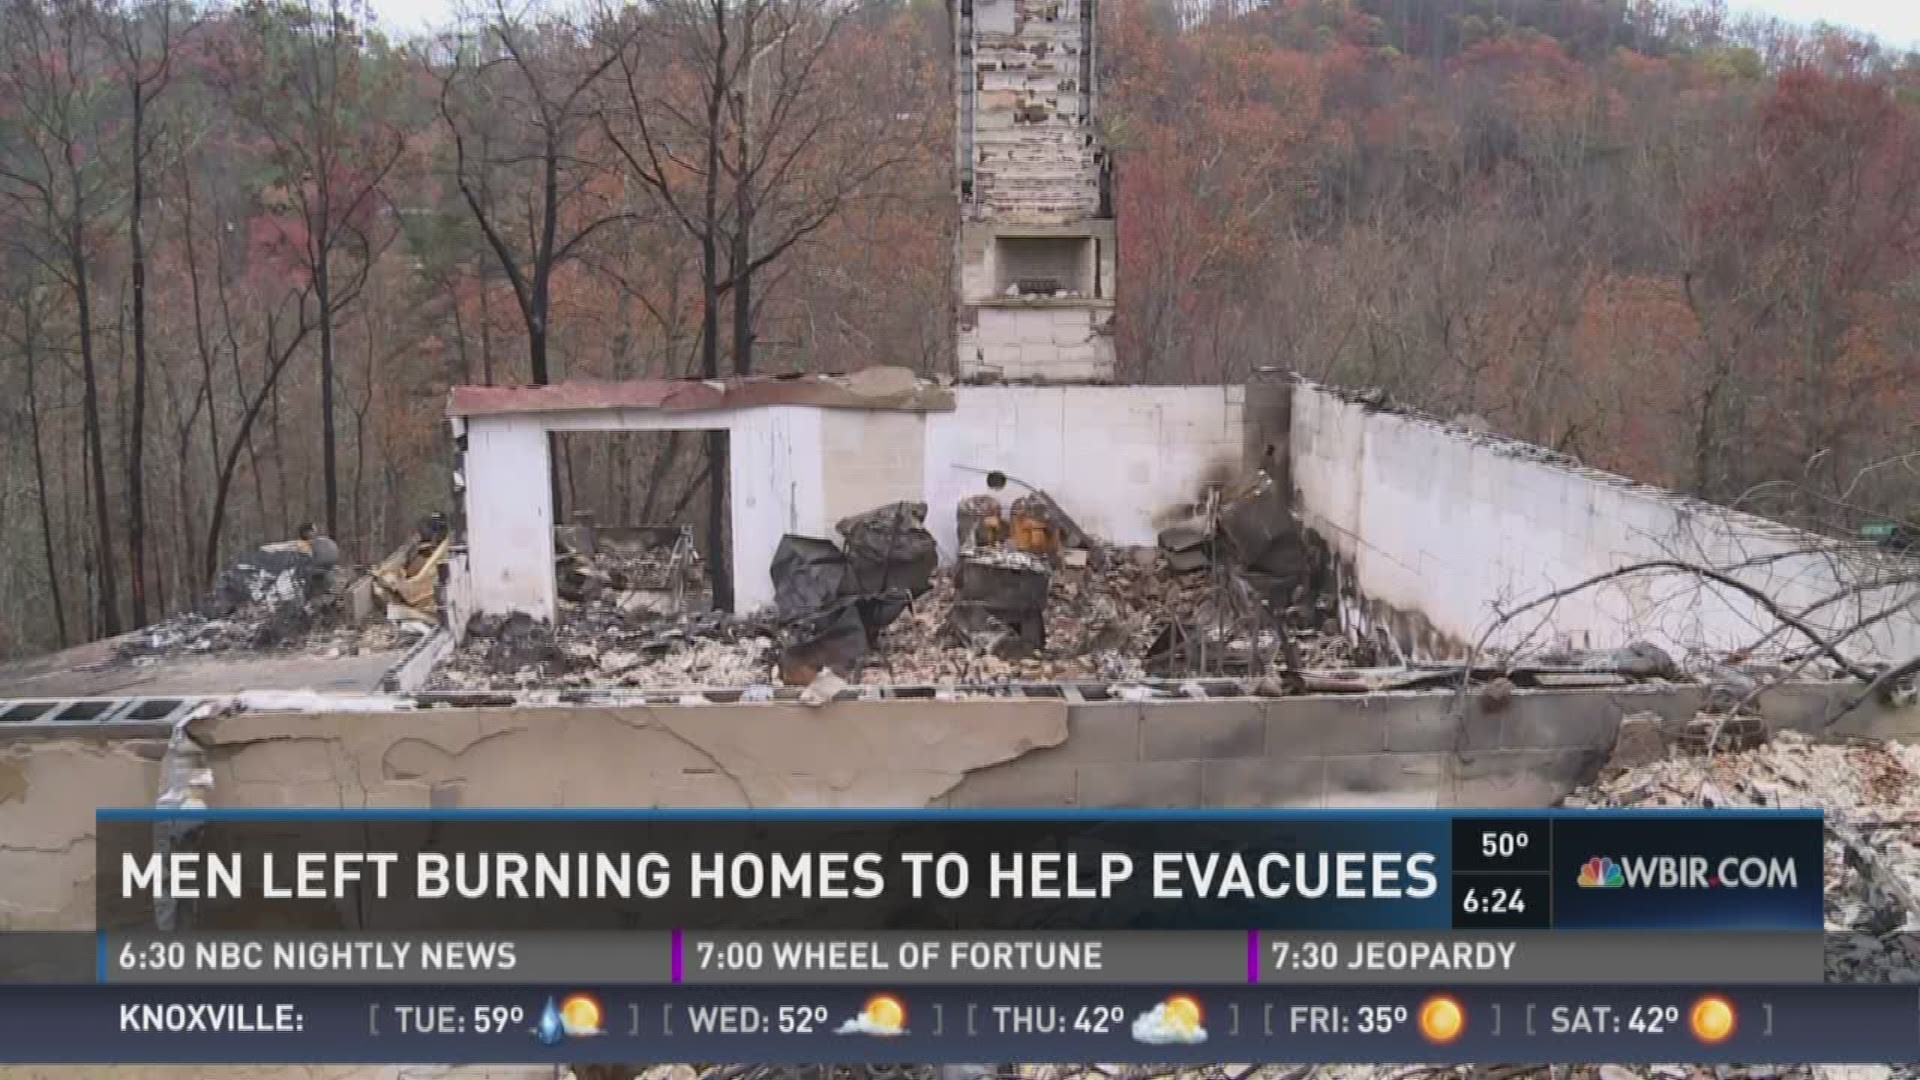 Dec. 5, 2016: In the midst of the Sevier County fires, two men drove to several nearby cabins to alert the residents to the approaching flames.